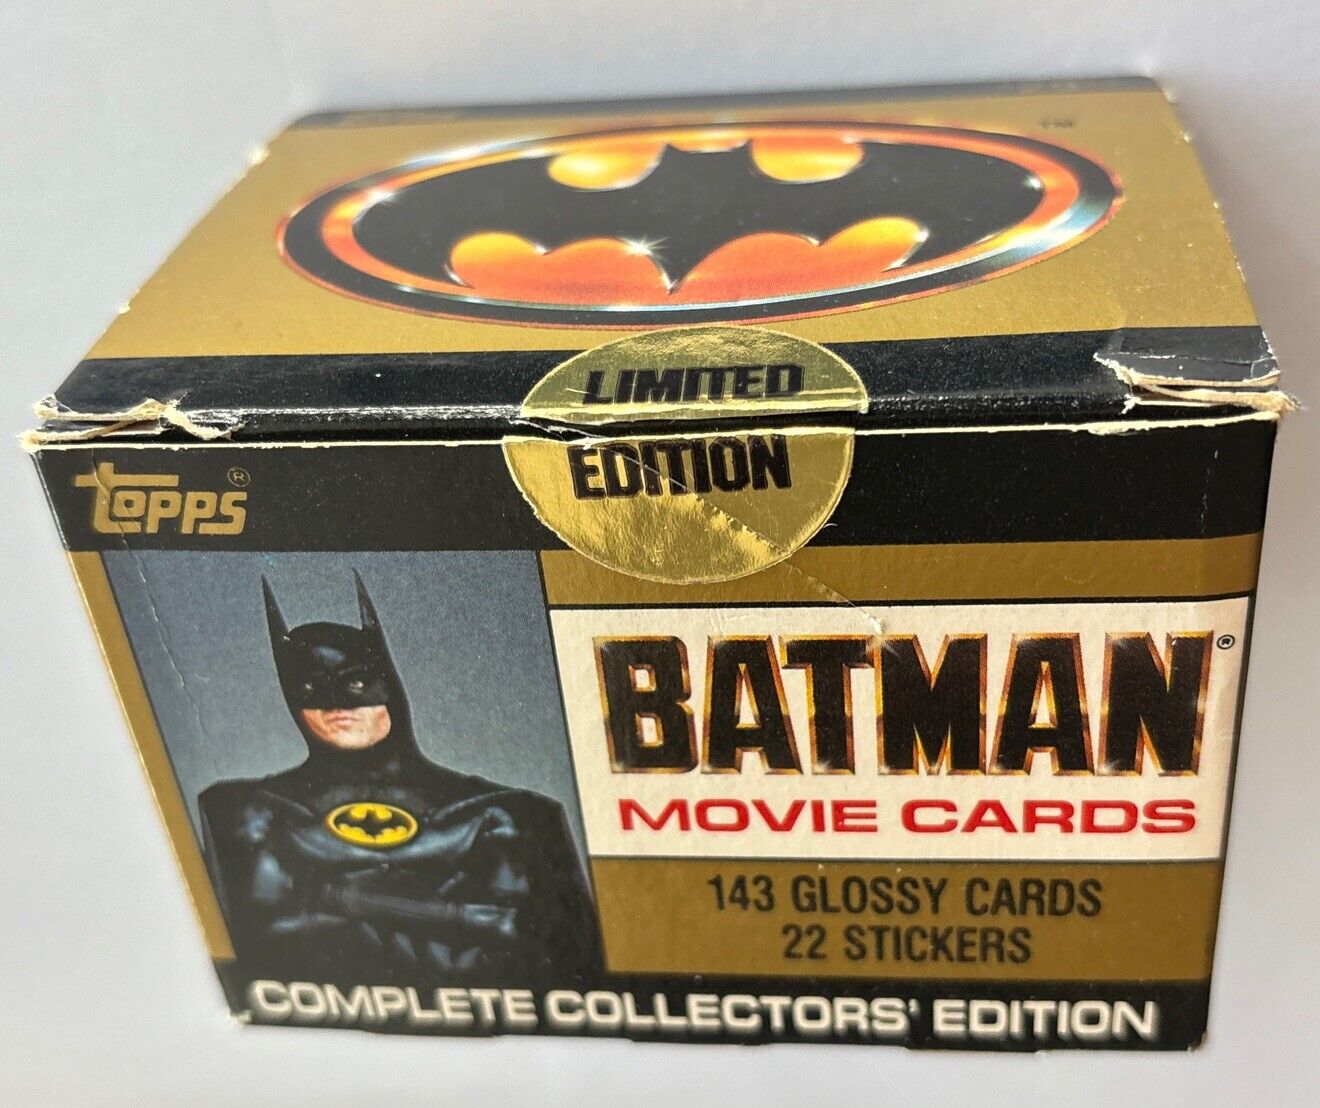 1989 Topps Batman Movie Cards - Glossy Collectors Edition - 143 Cards/22 Sticker